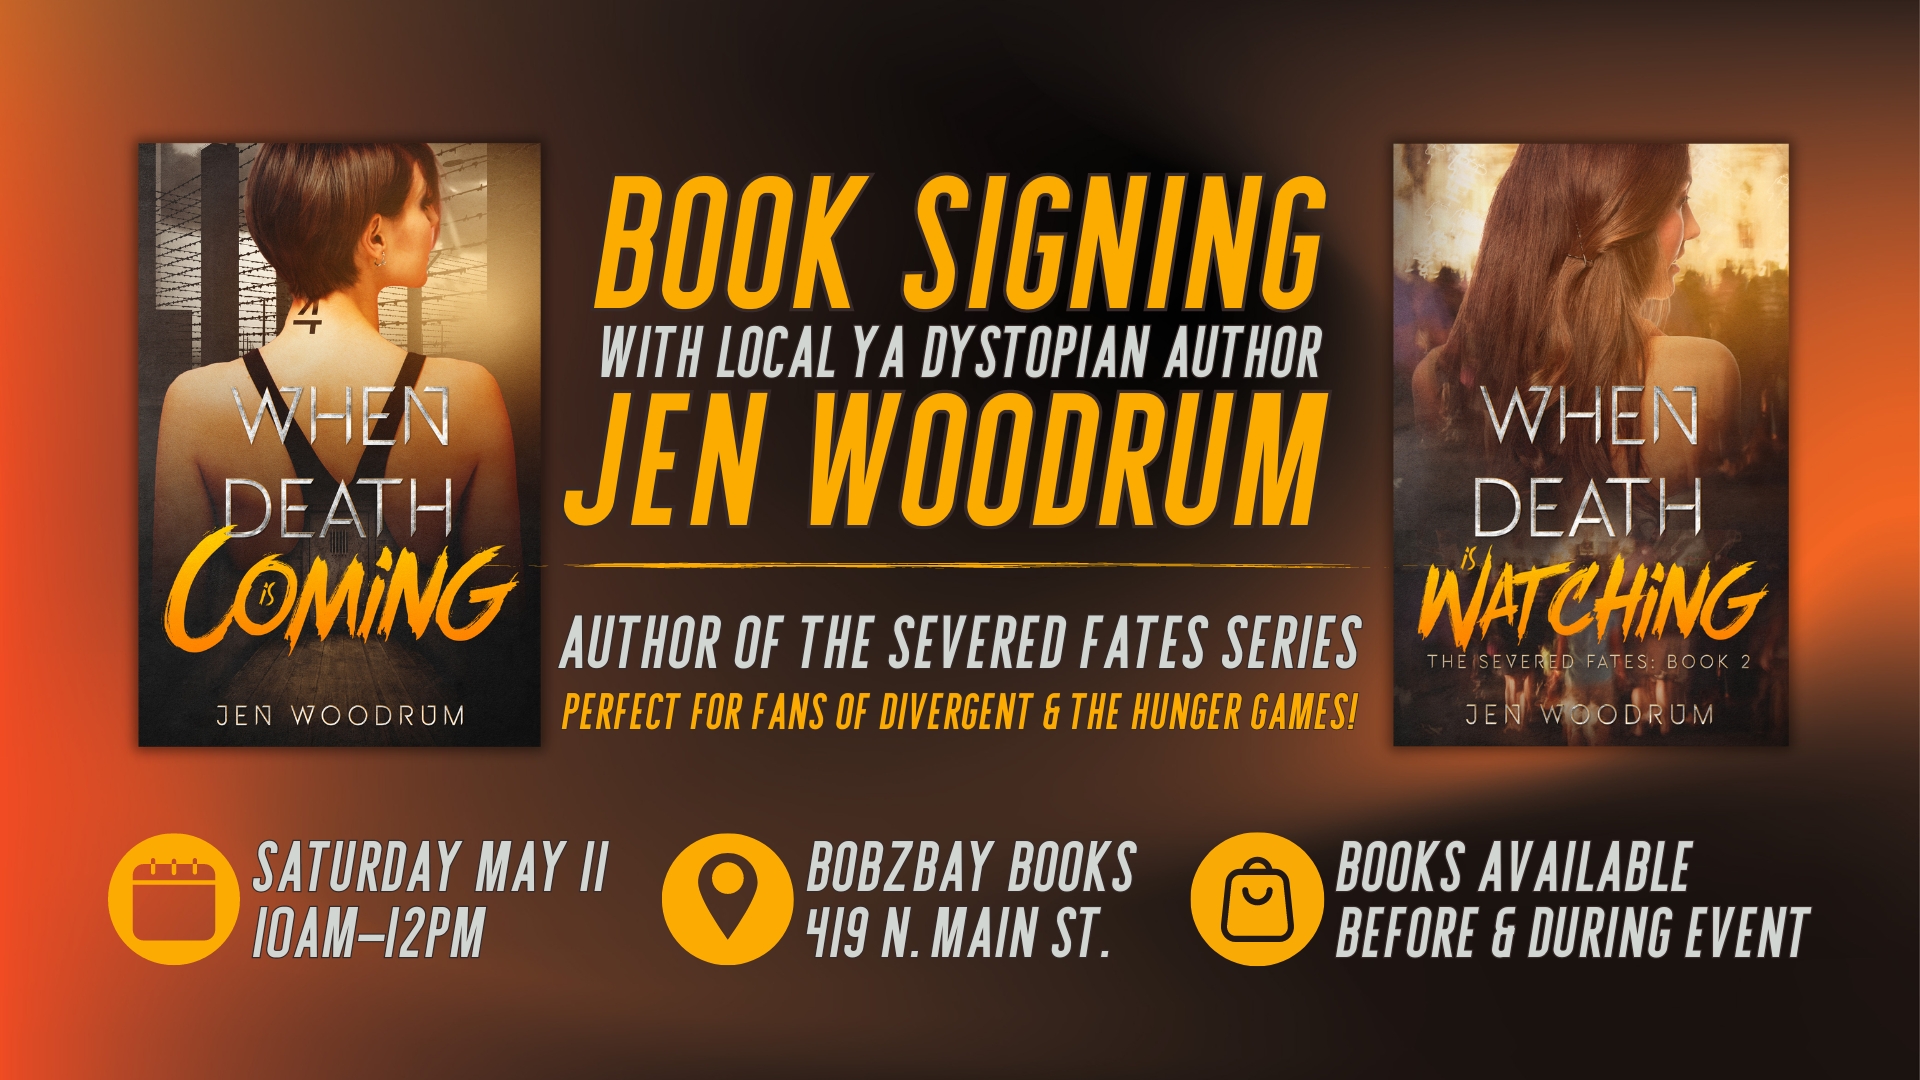 Book Signing with YA/Teen Dystopian Author Jen Woodrum at Bobzbay Books